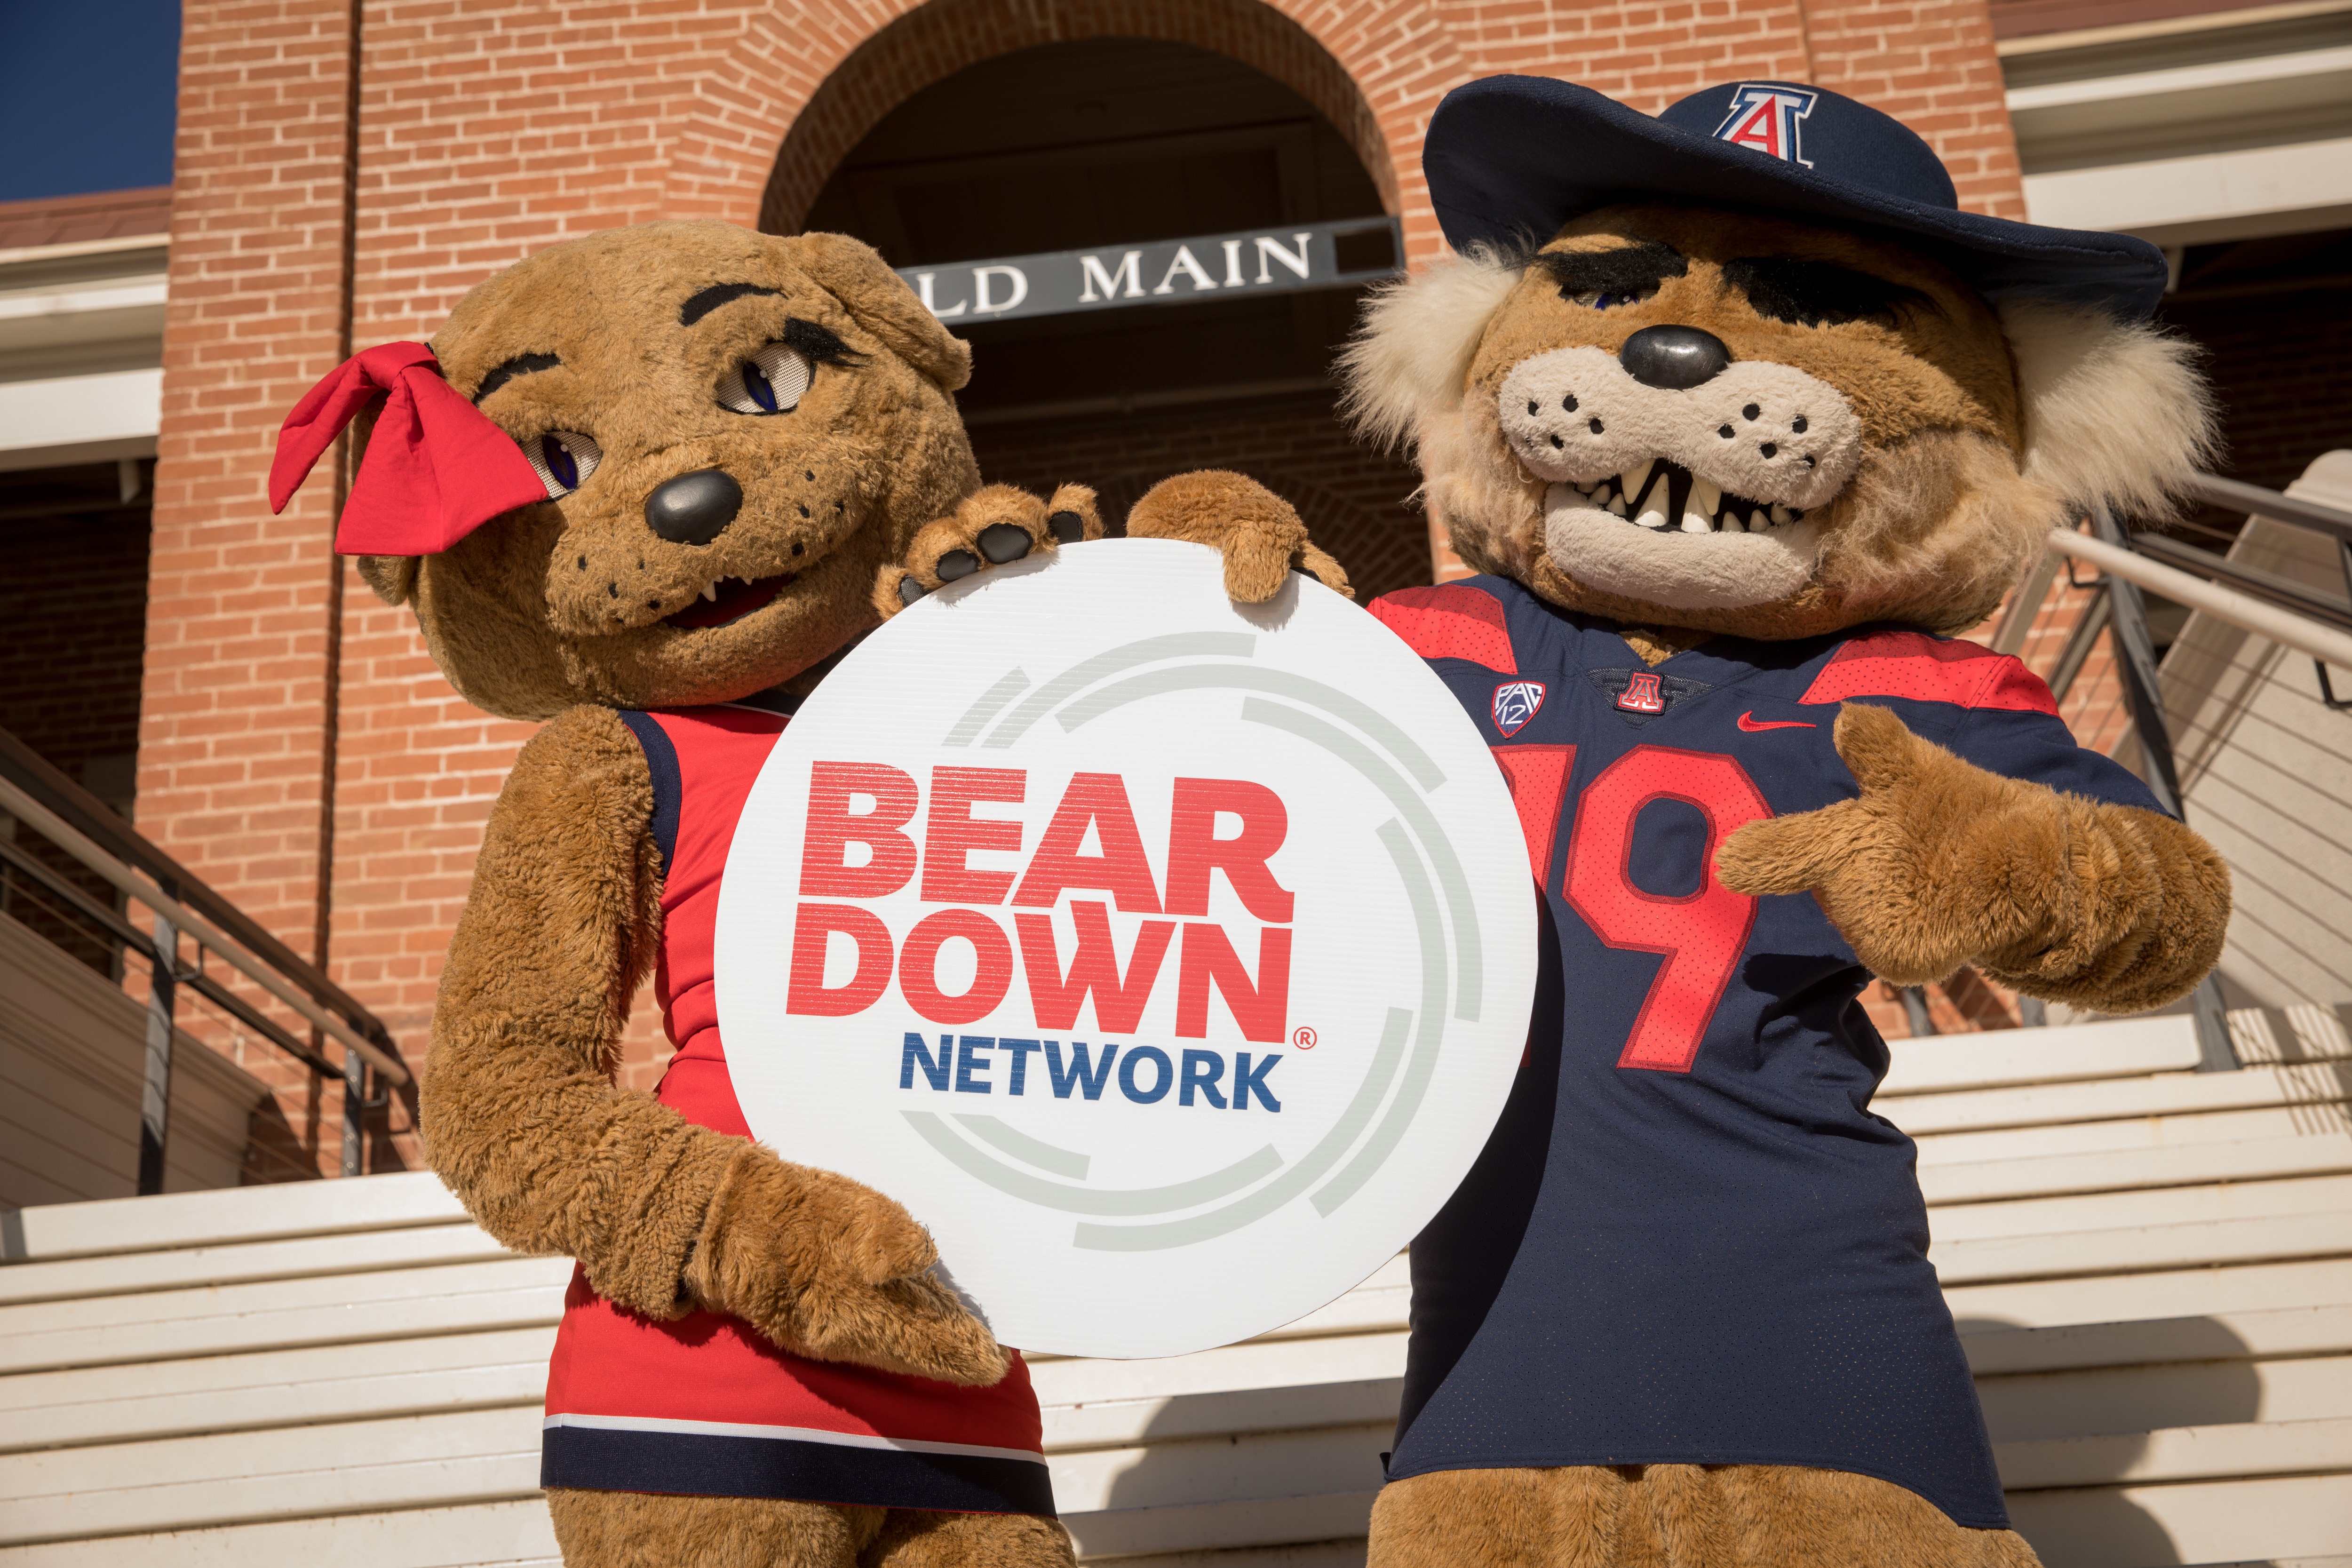 Wilma and Wilbur mascots holding Bear Down Network sign